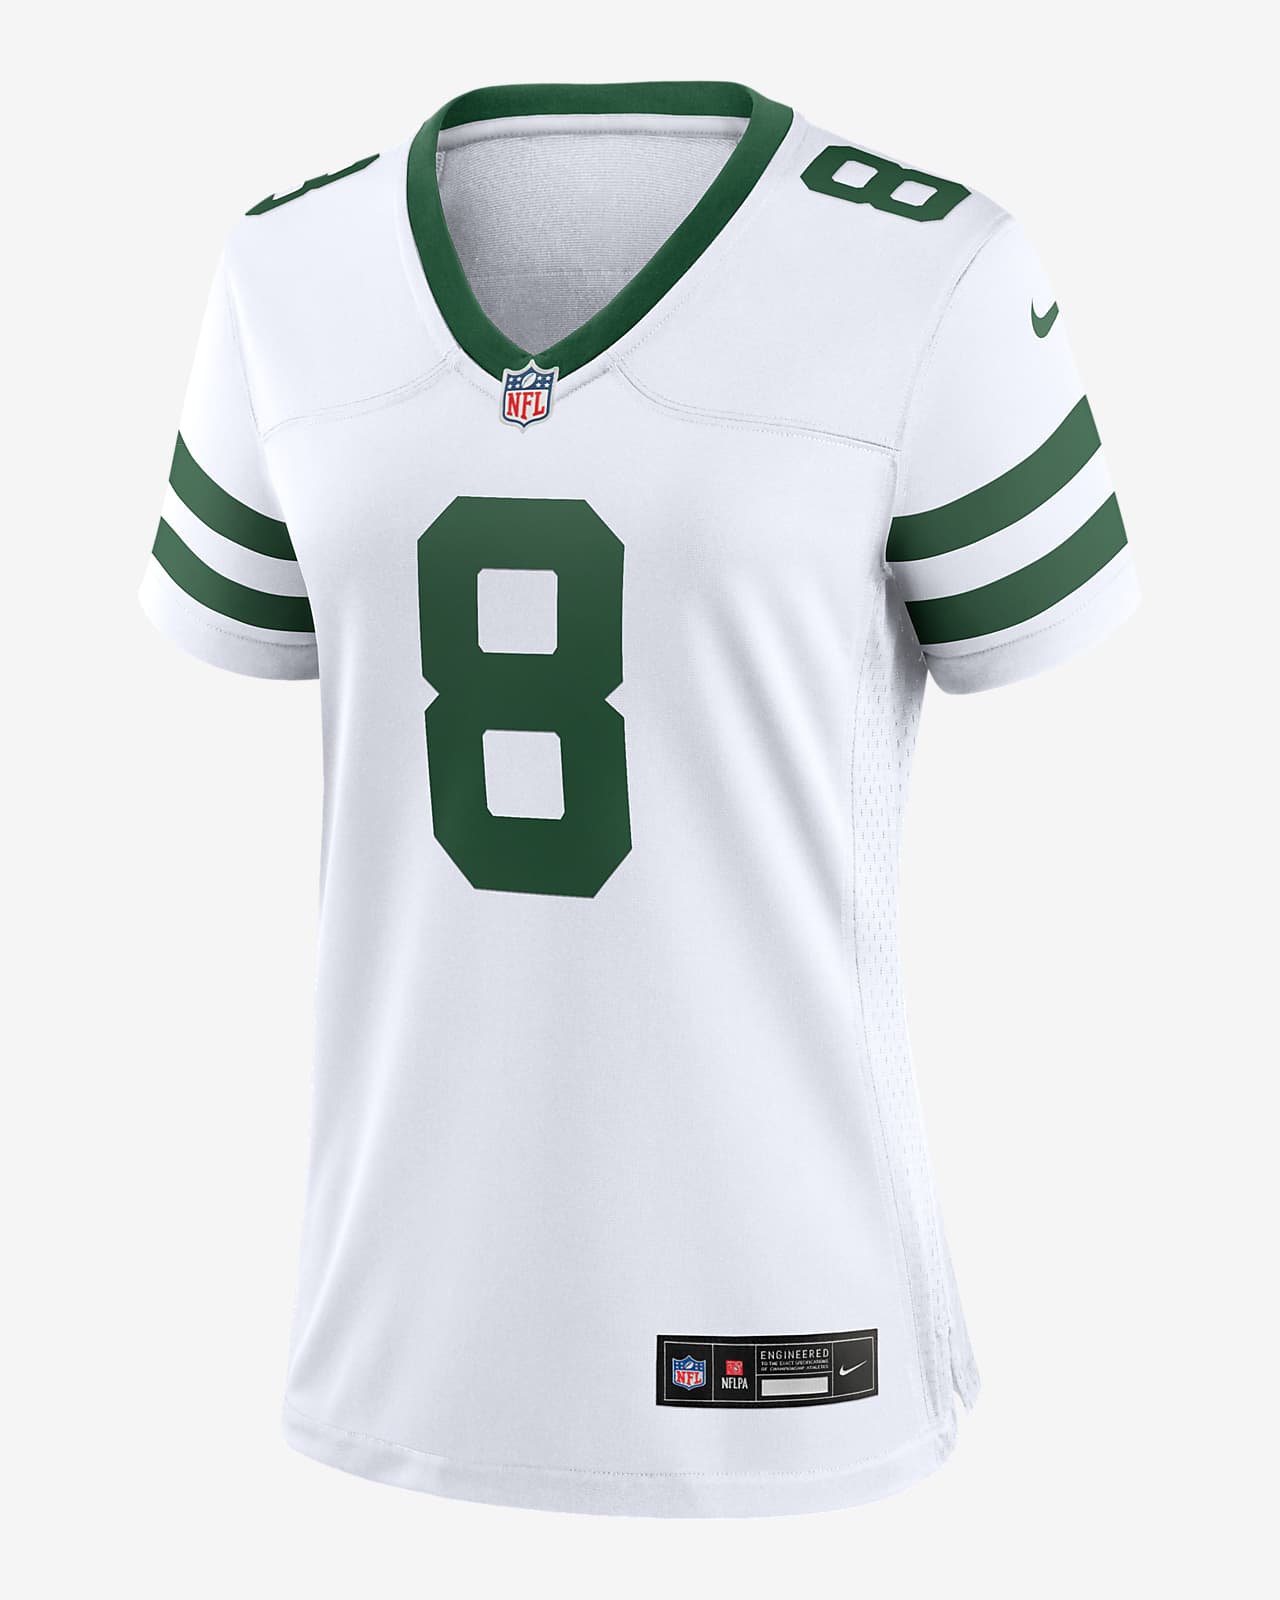 Aaron Rodgers New York Jets Women's Nike NFL Game Football Jersey